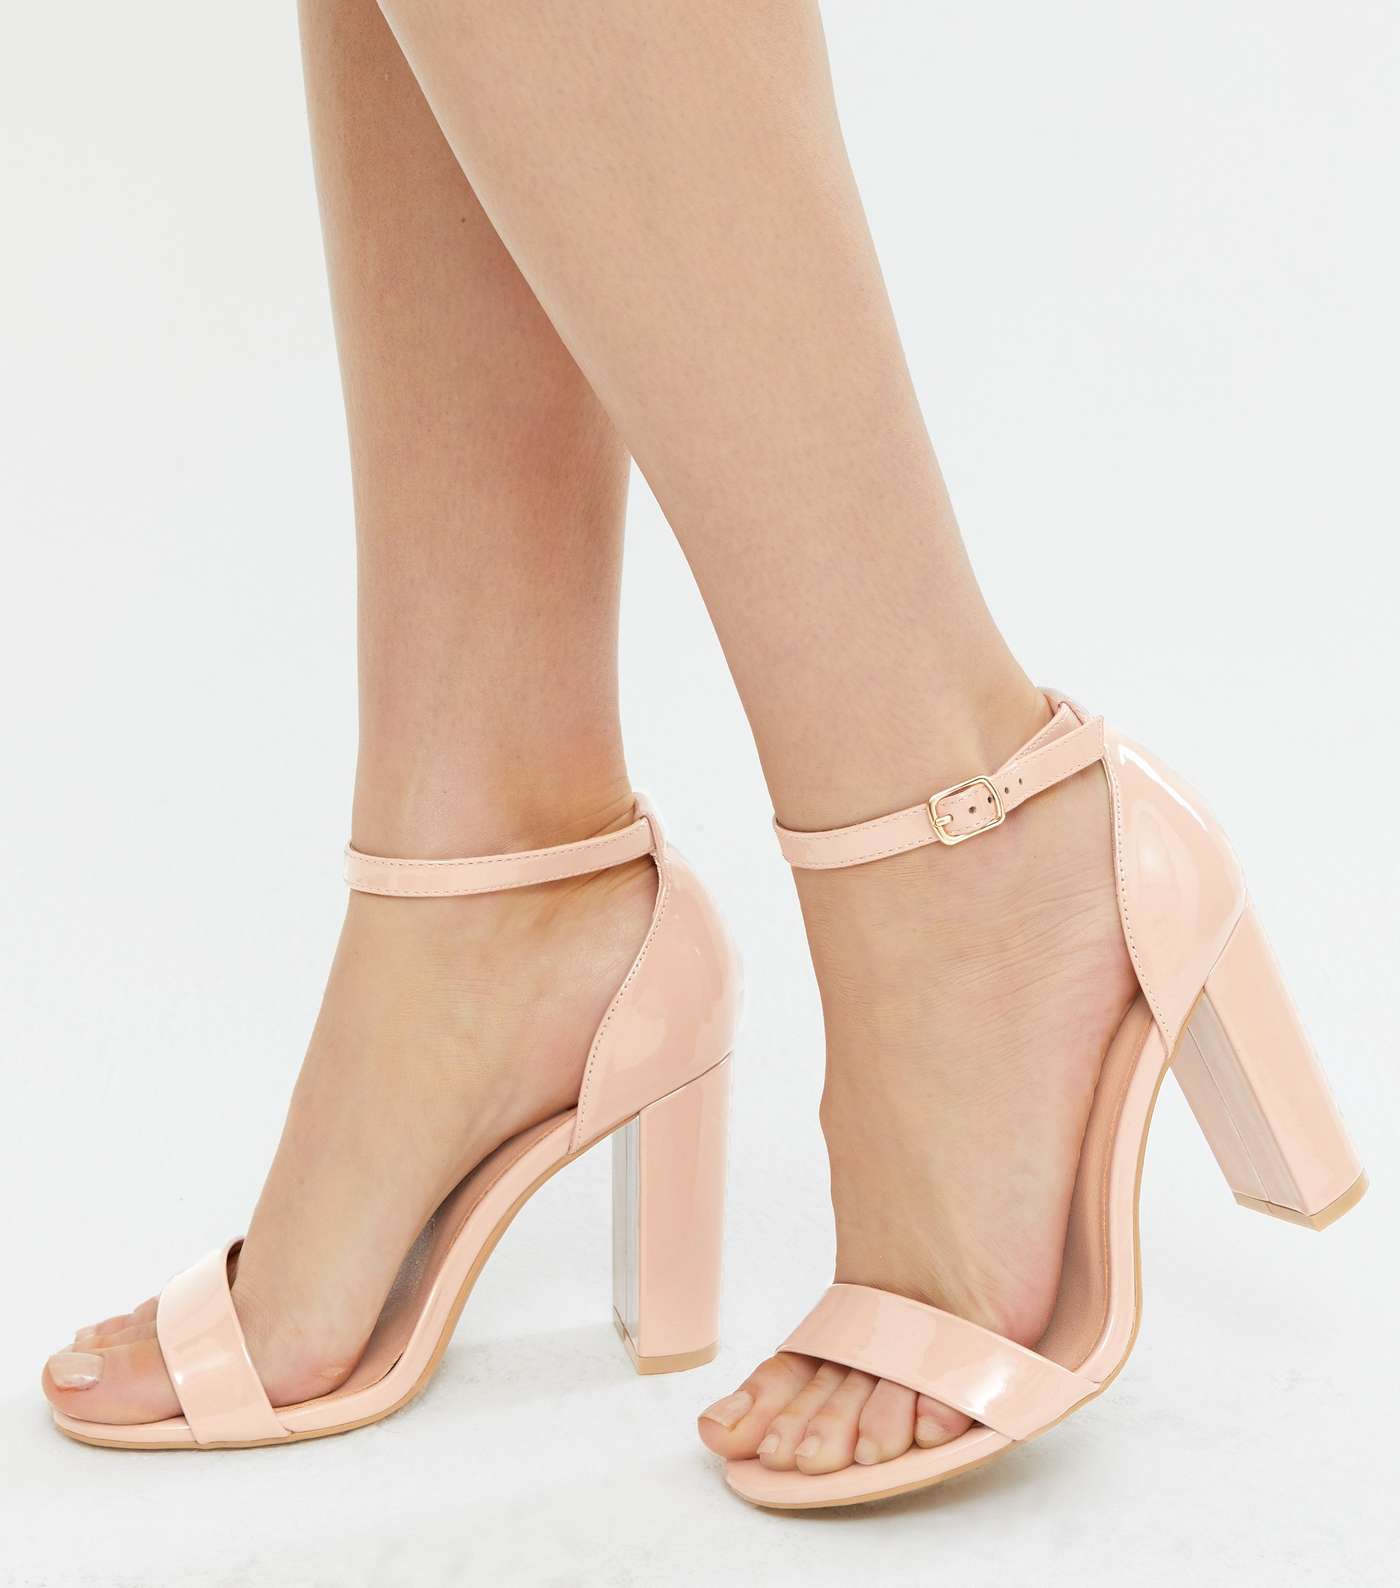 Wide Fit Pale Pink Patent Strappy Block Heel Sandals Image 2